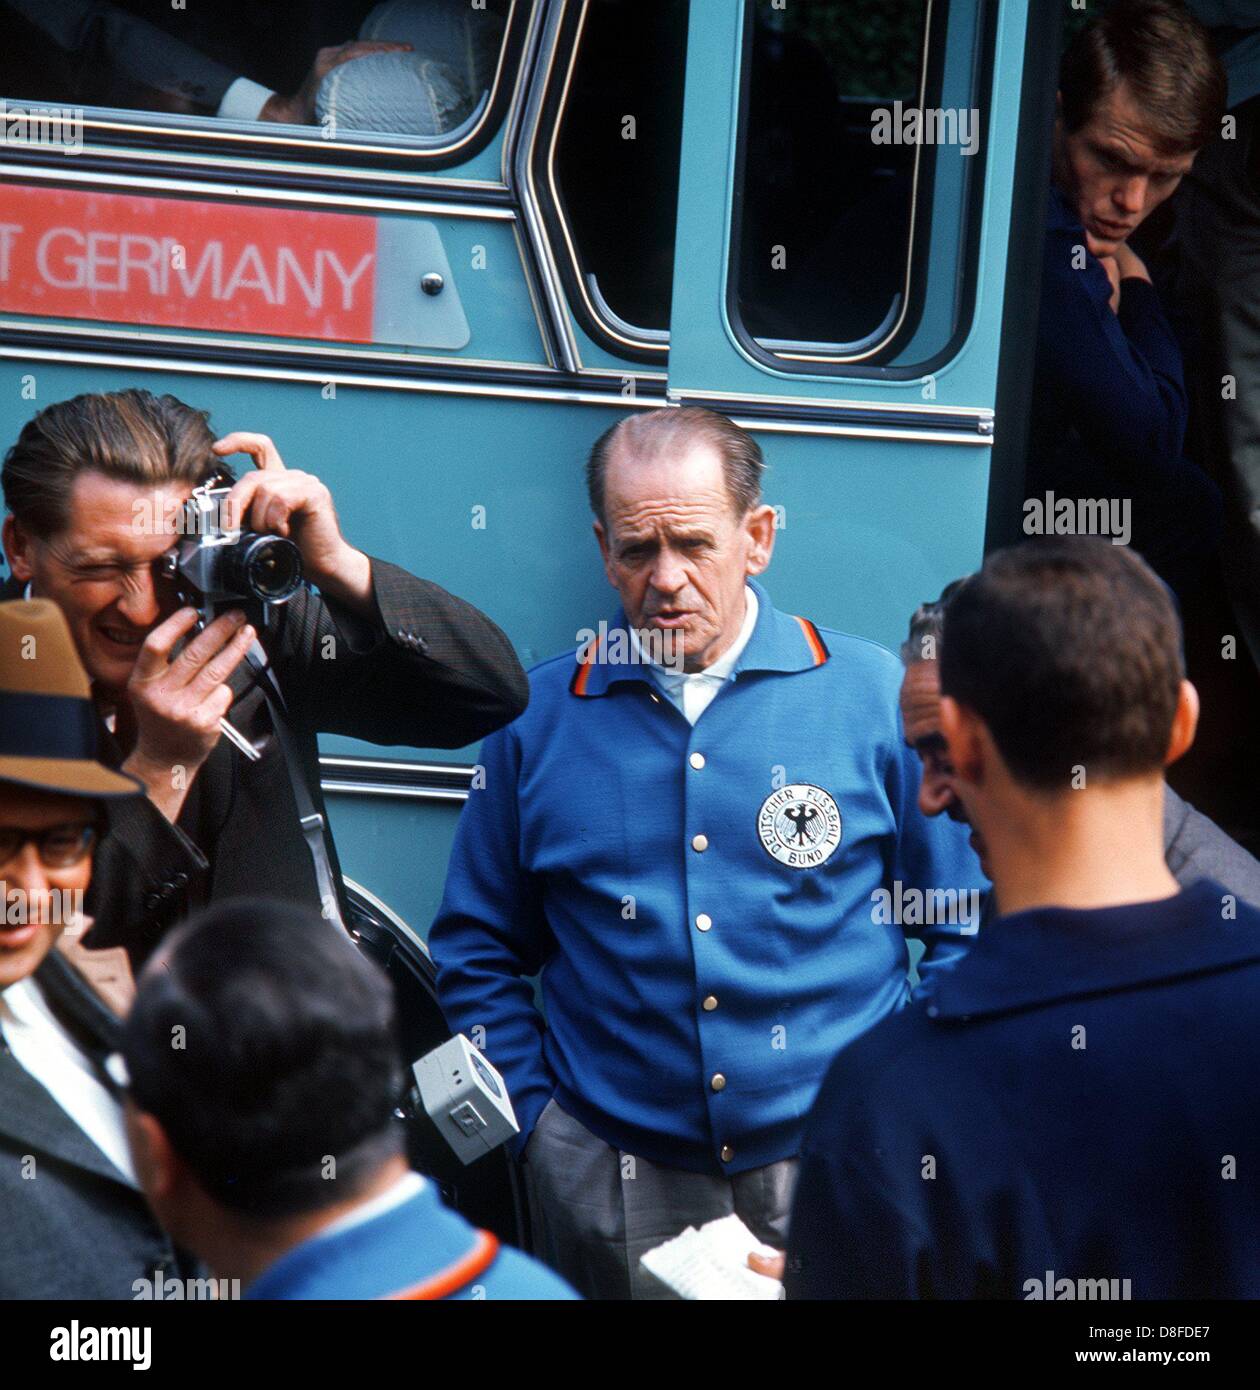 German national team coach Sepp Herberger (centre) standing next to the team bus just before leaving for a practice session during the 1966 World Cup in England. (undated file photo) Stock Photo